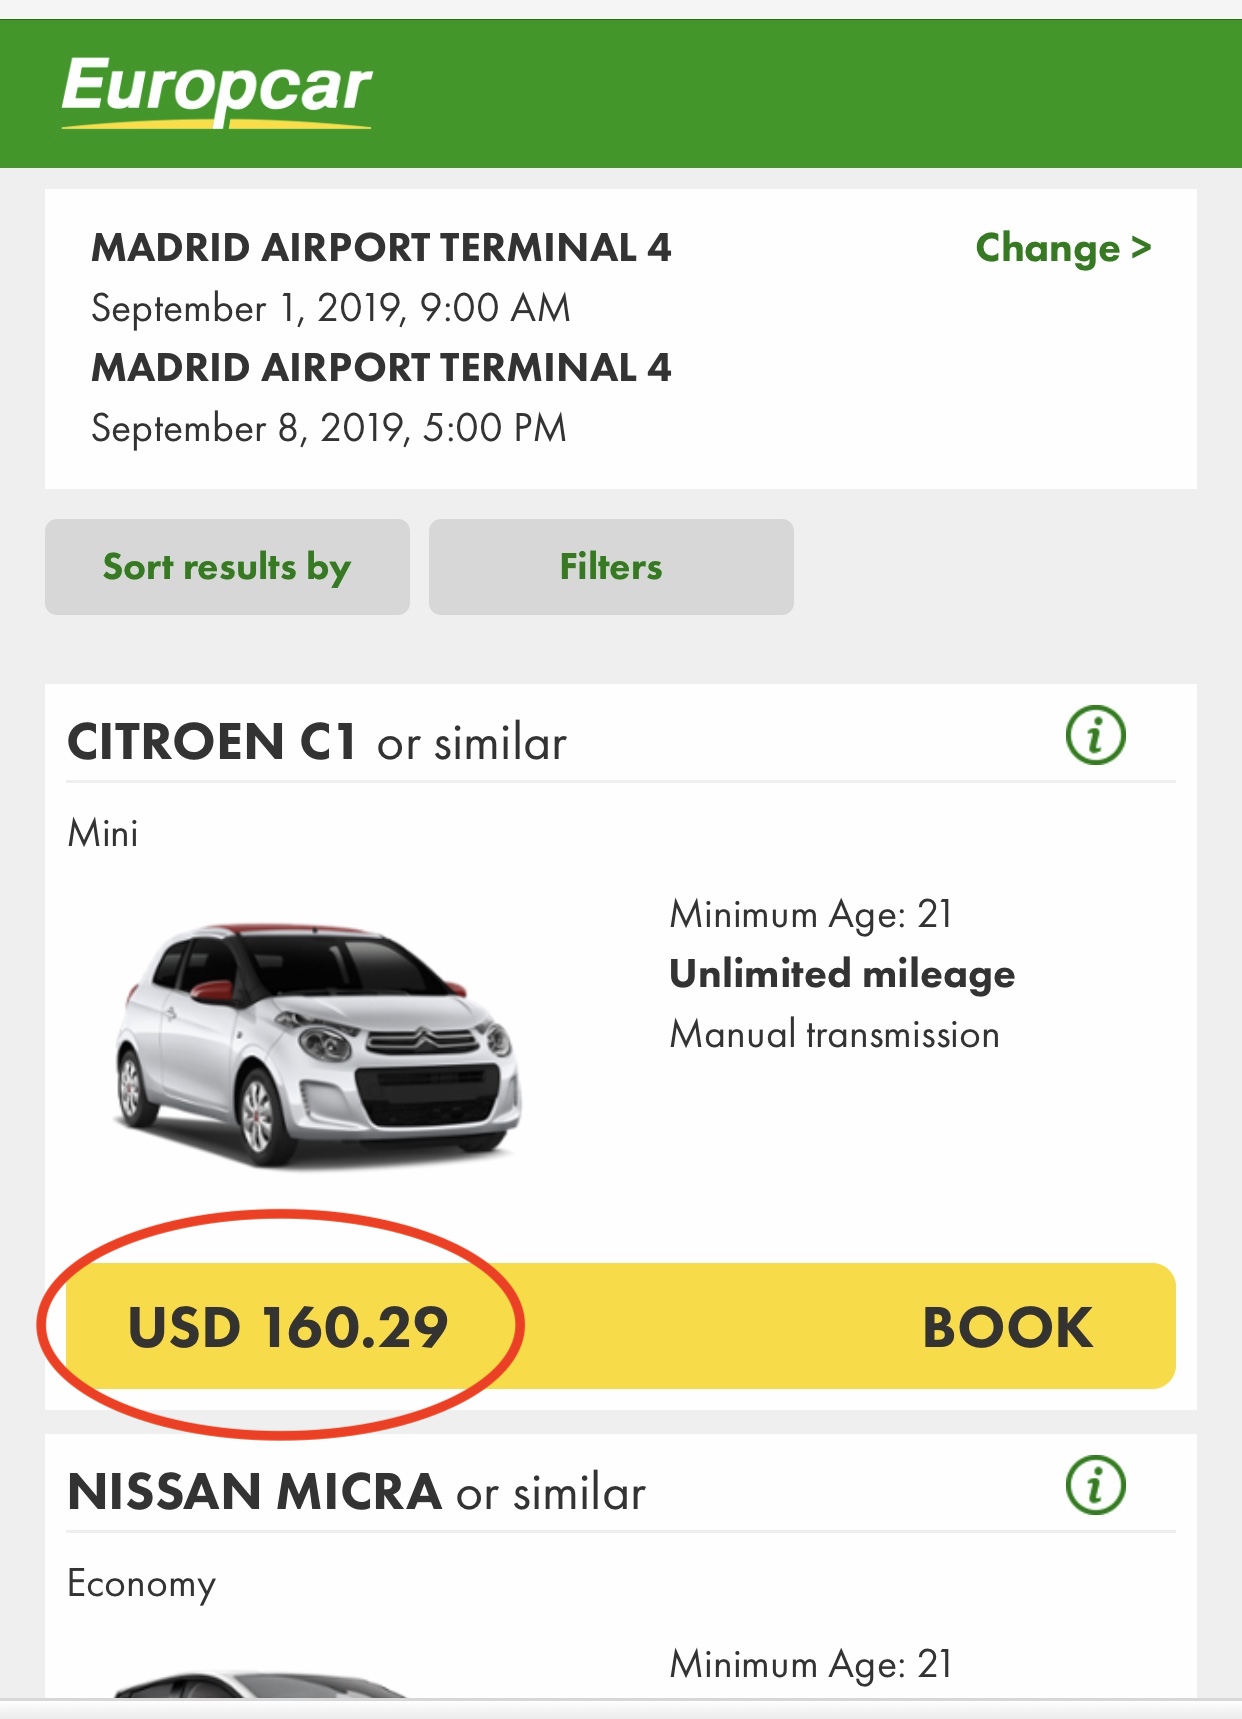  Comparing prices on Europcar's Desktop and Mobile Sites 